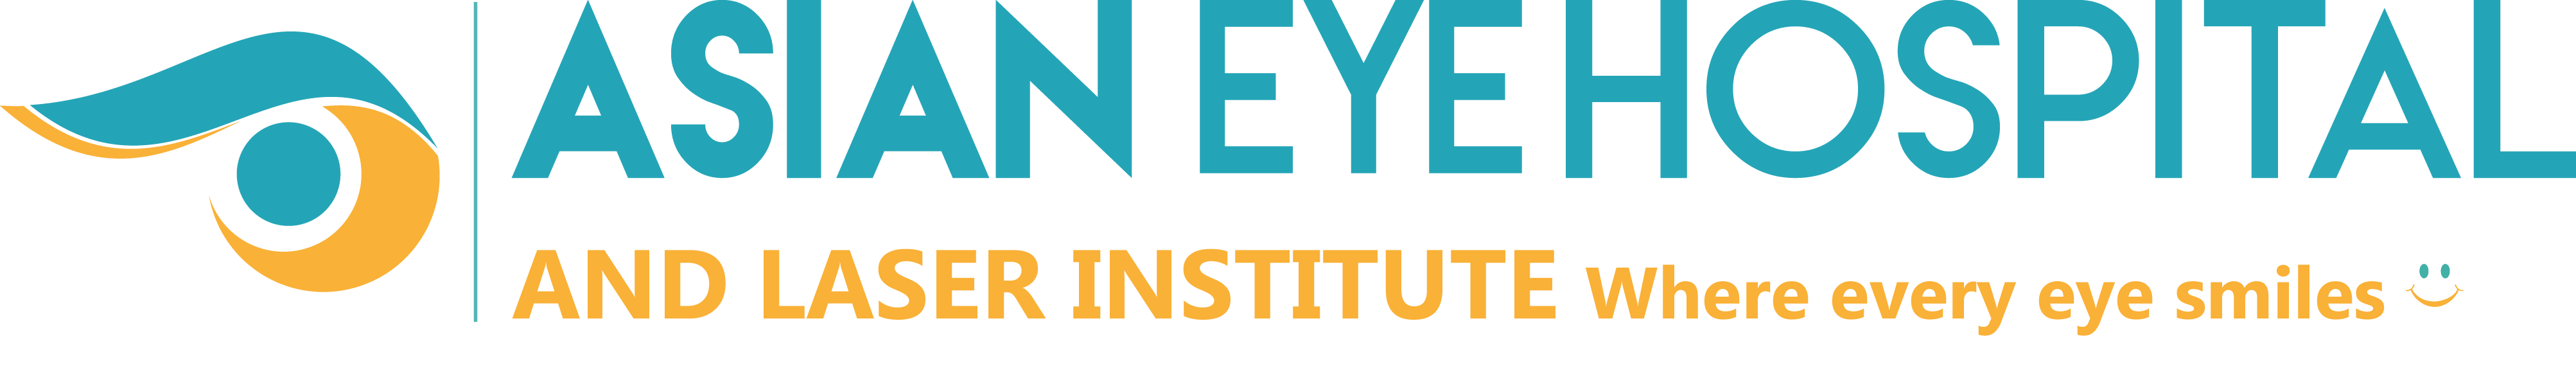 Asian Eye Hospital and Laser Institute